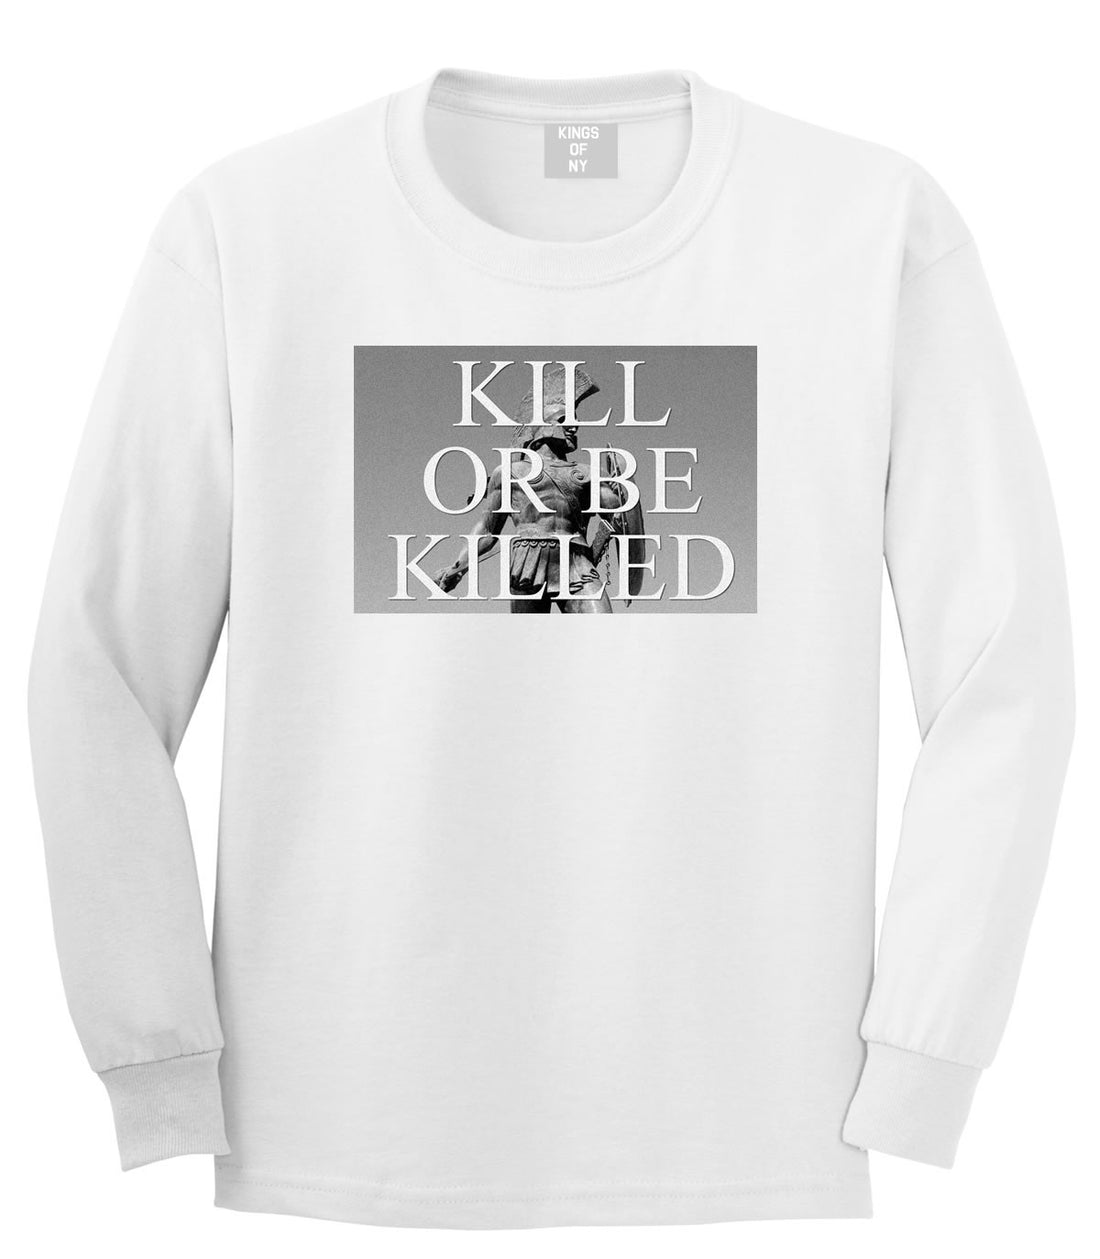 Kill Or Be Killed Boys Kids Long Sleeve T-Shirt in White by Kings Of NY